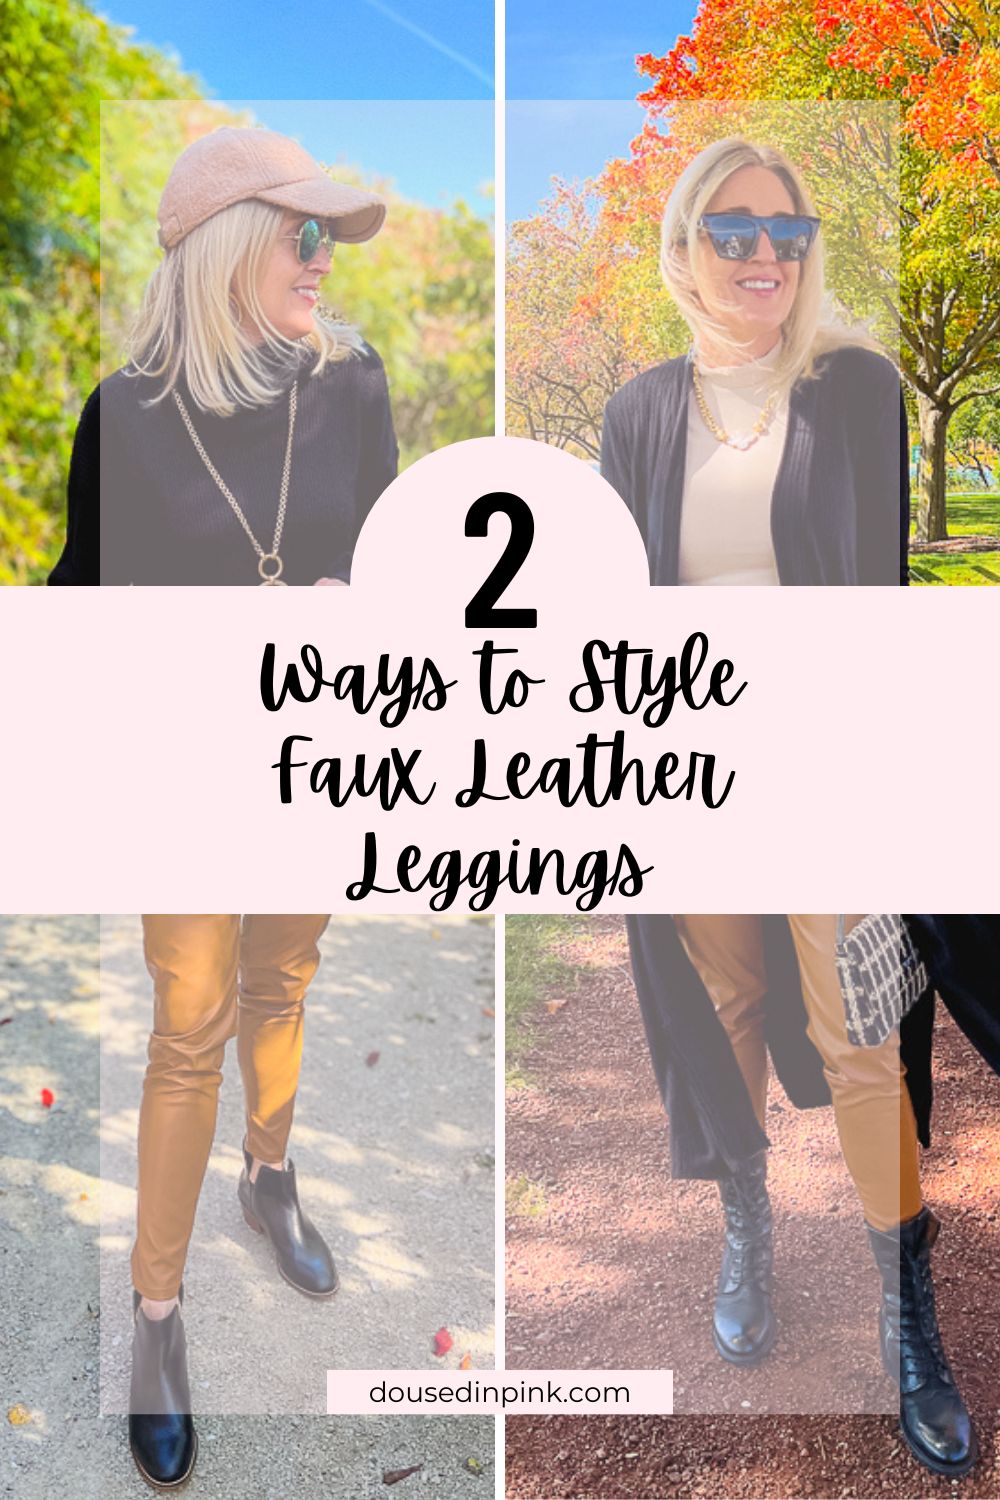 2 ways to style faux leather leggings